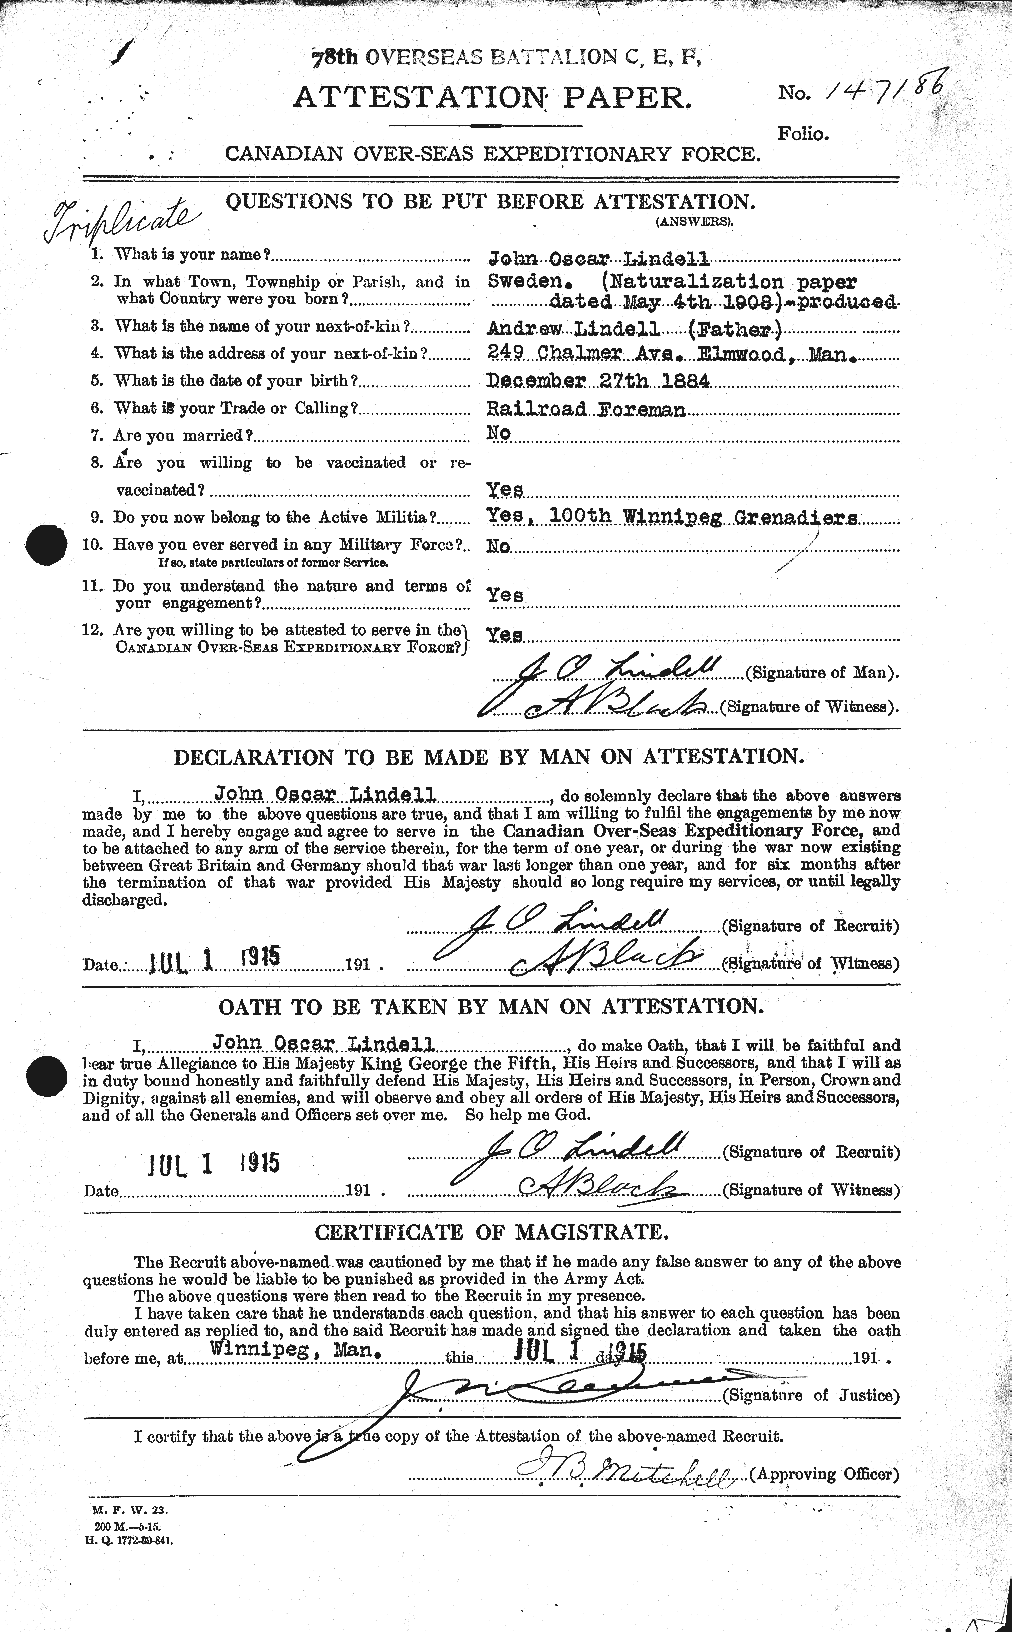 Personnel Records of the First World War - CEF 467689a